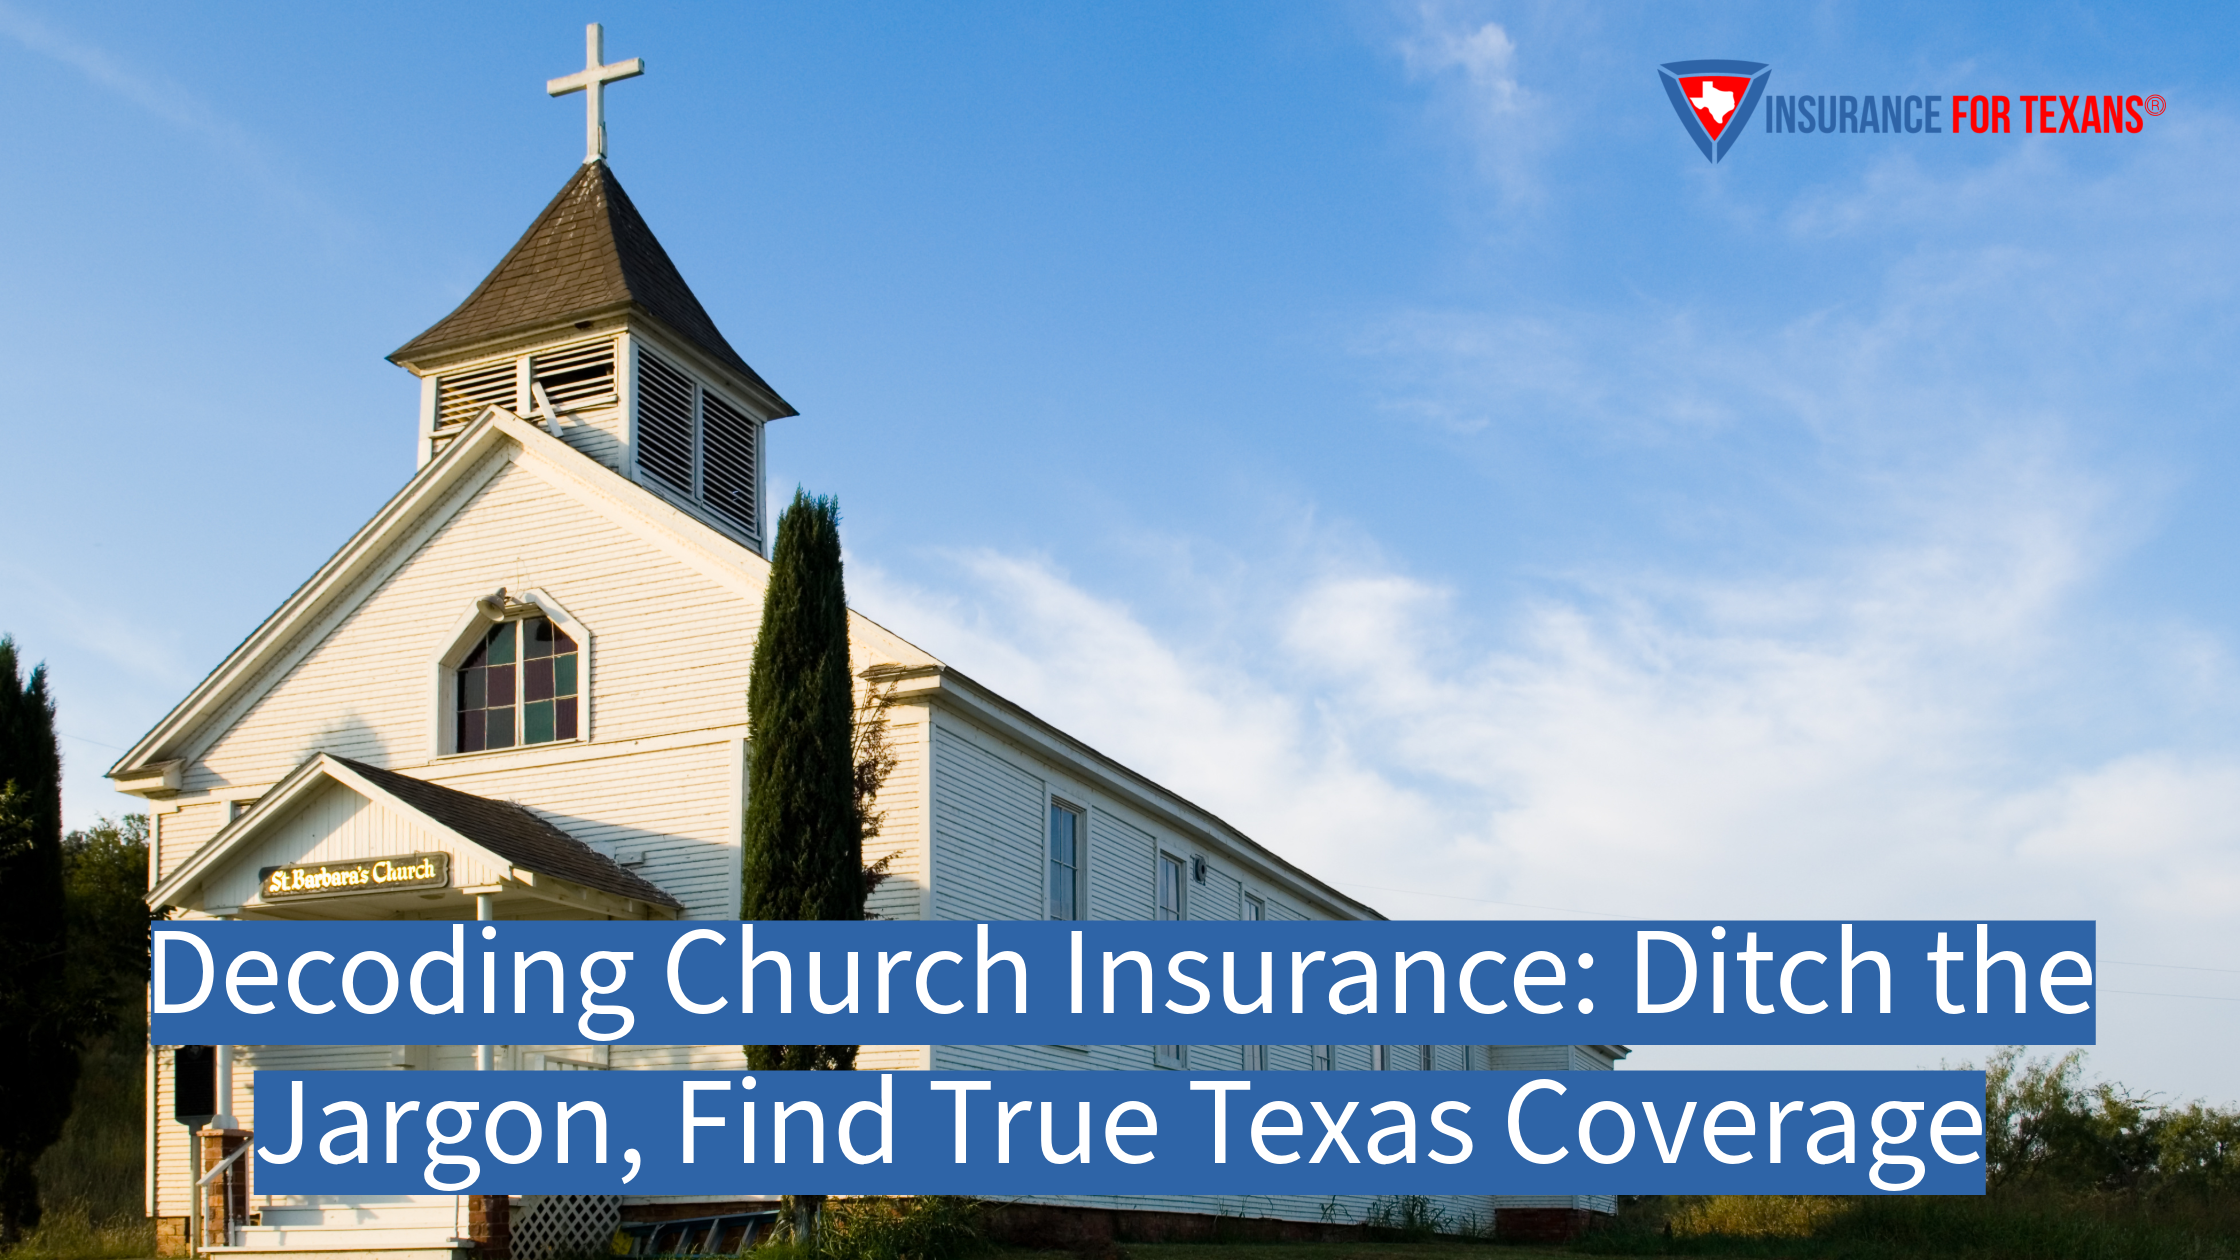 Decoding Church Insurance: Ditch the Jargon, Find True Texas Coverage